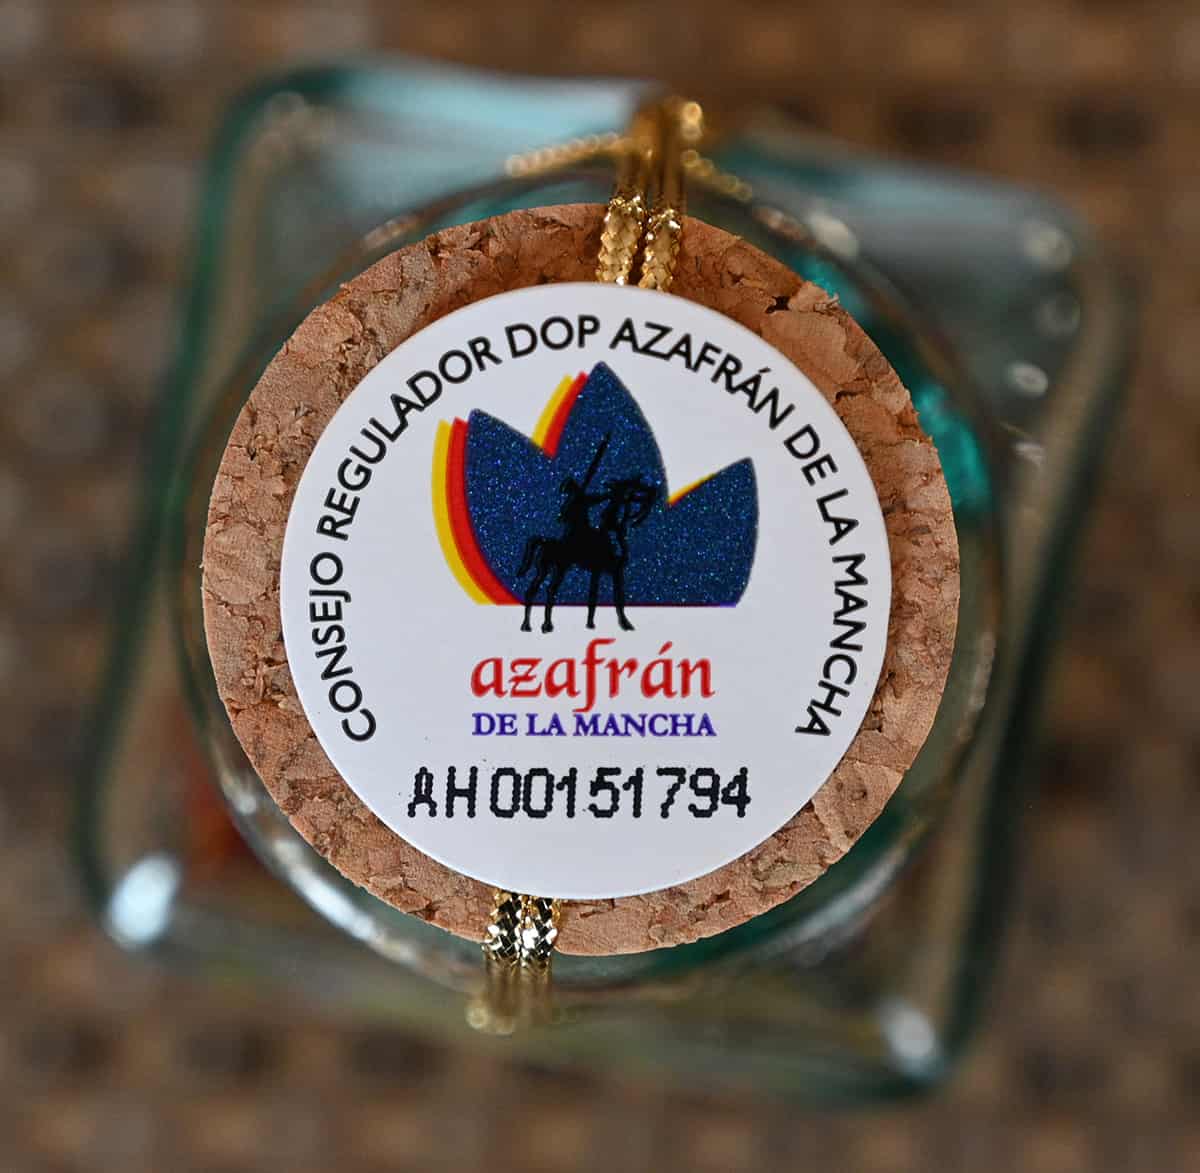 Top down image of the number labeled on the jar guaranteeing the saffron is from the La Mancha region in Spain.